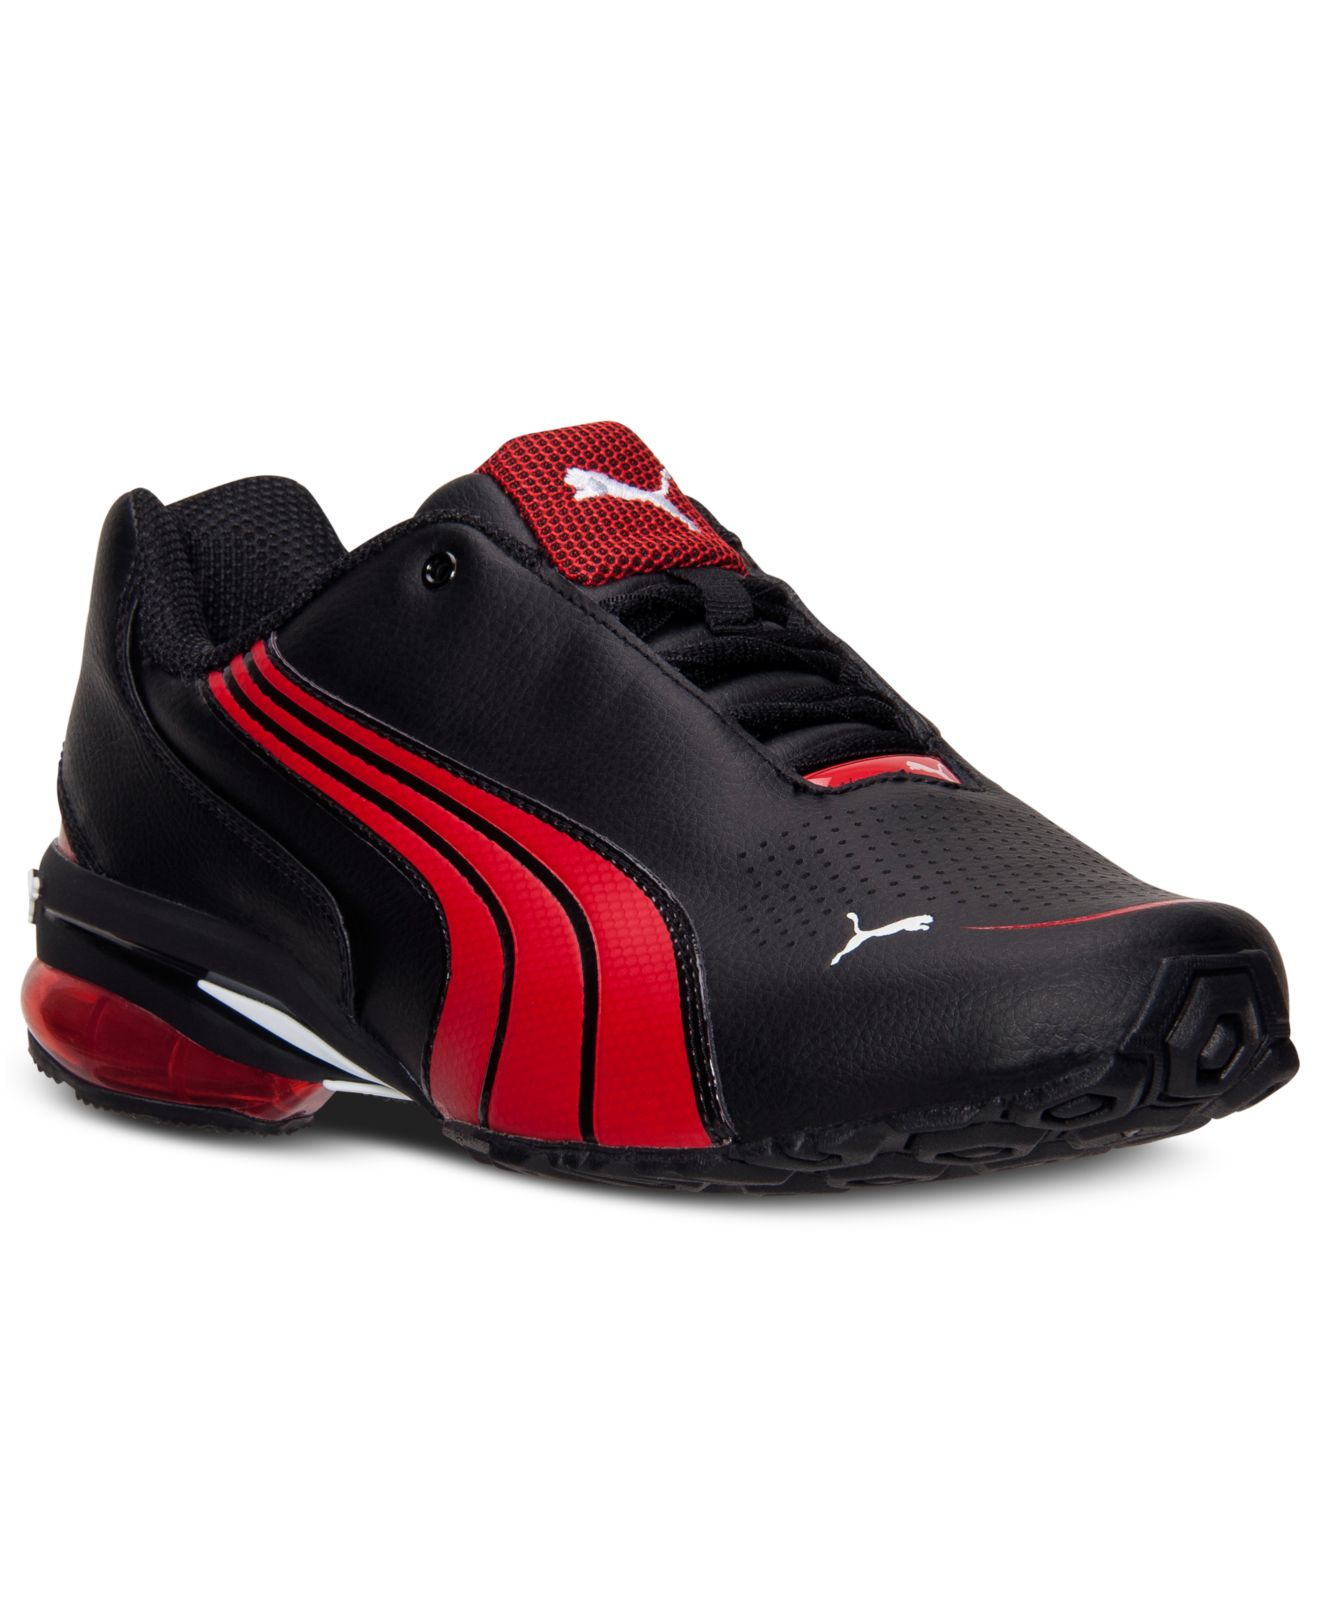 Lyst - Puma Men'S Cell Jago 9 Running Sneakers From Finish Line in Red ...